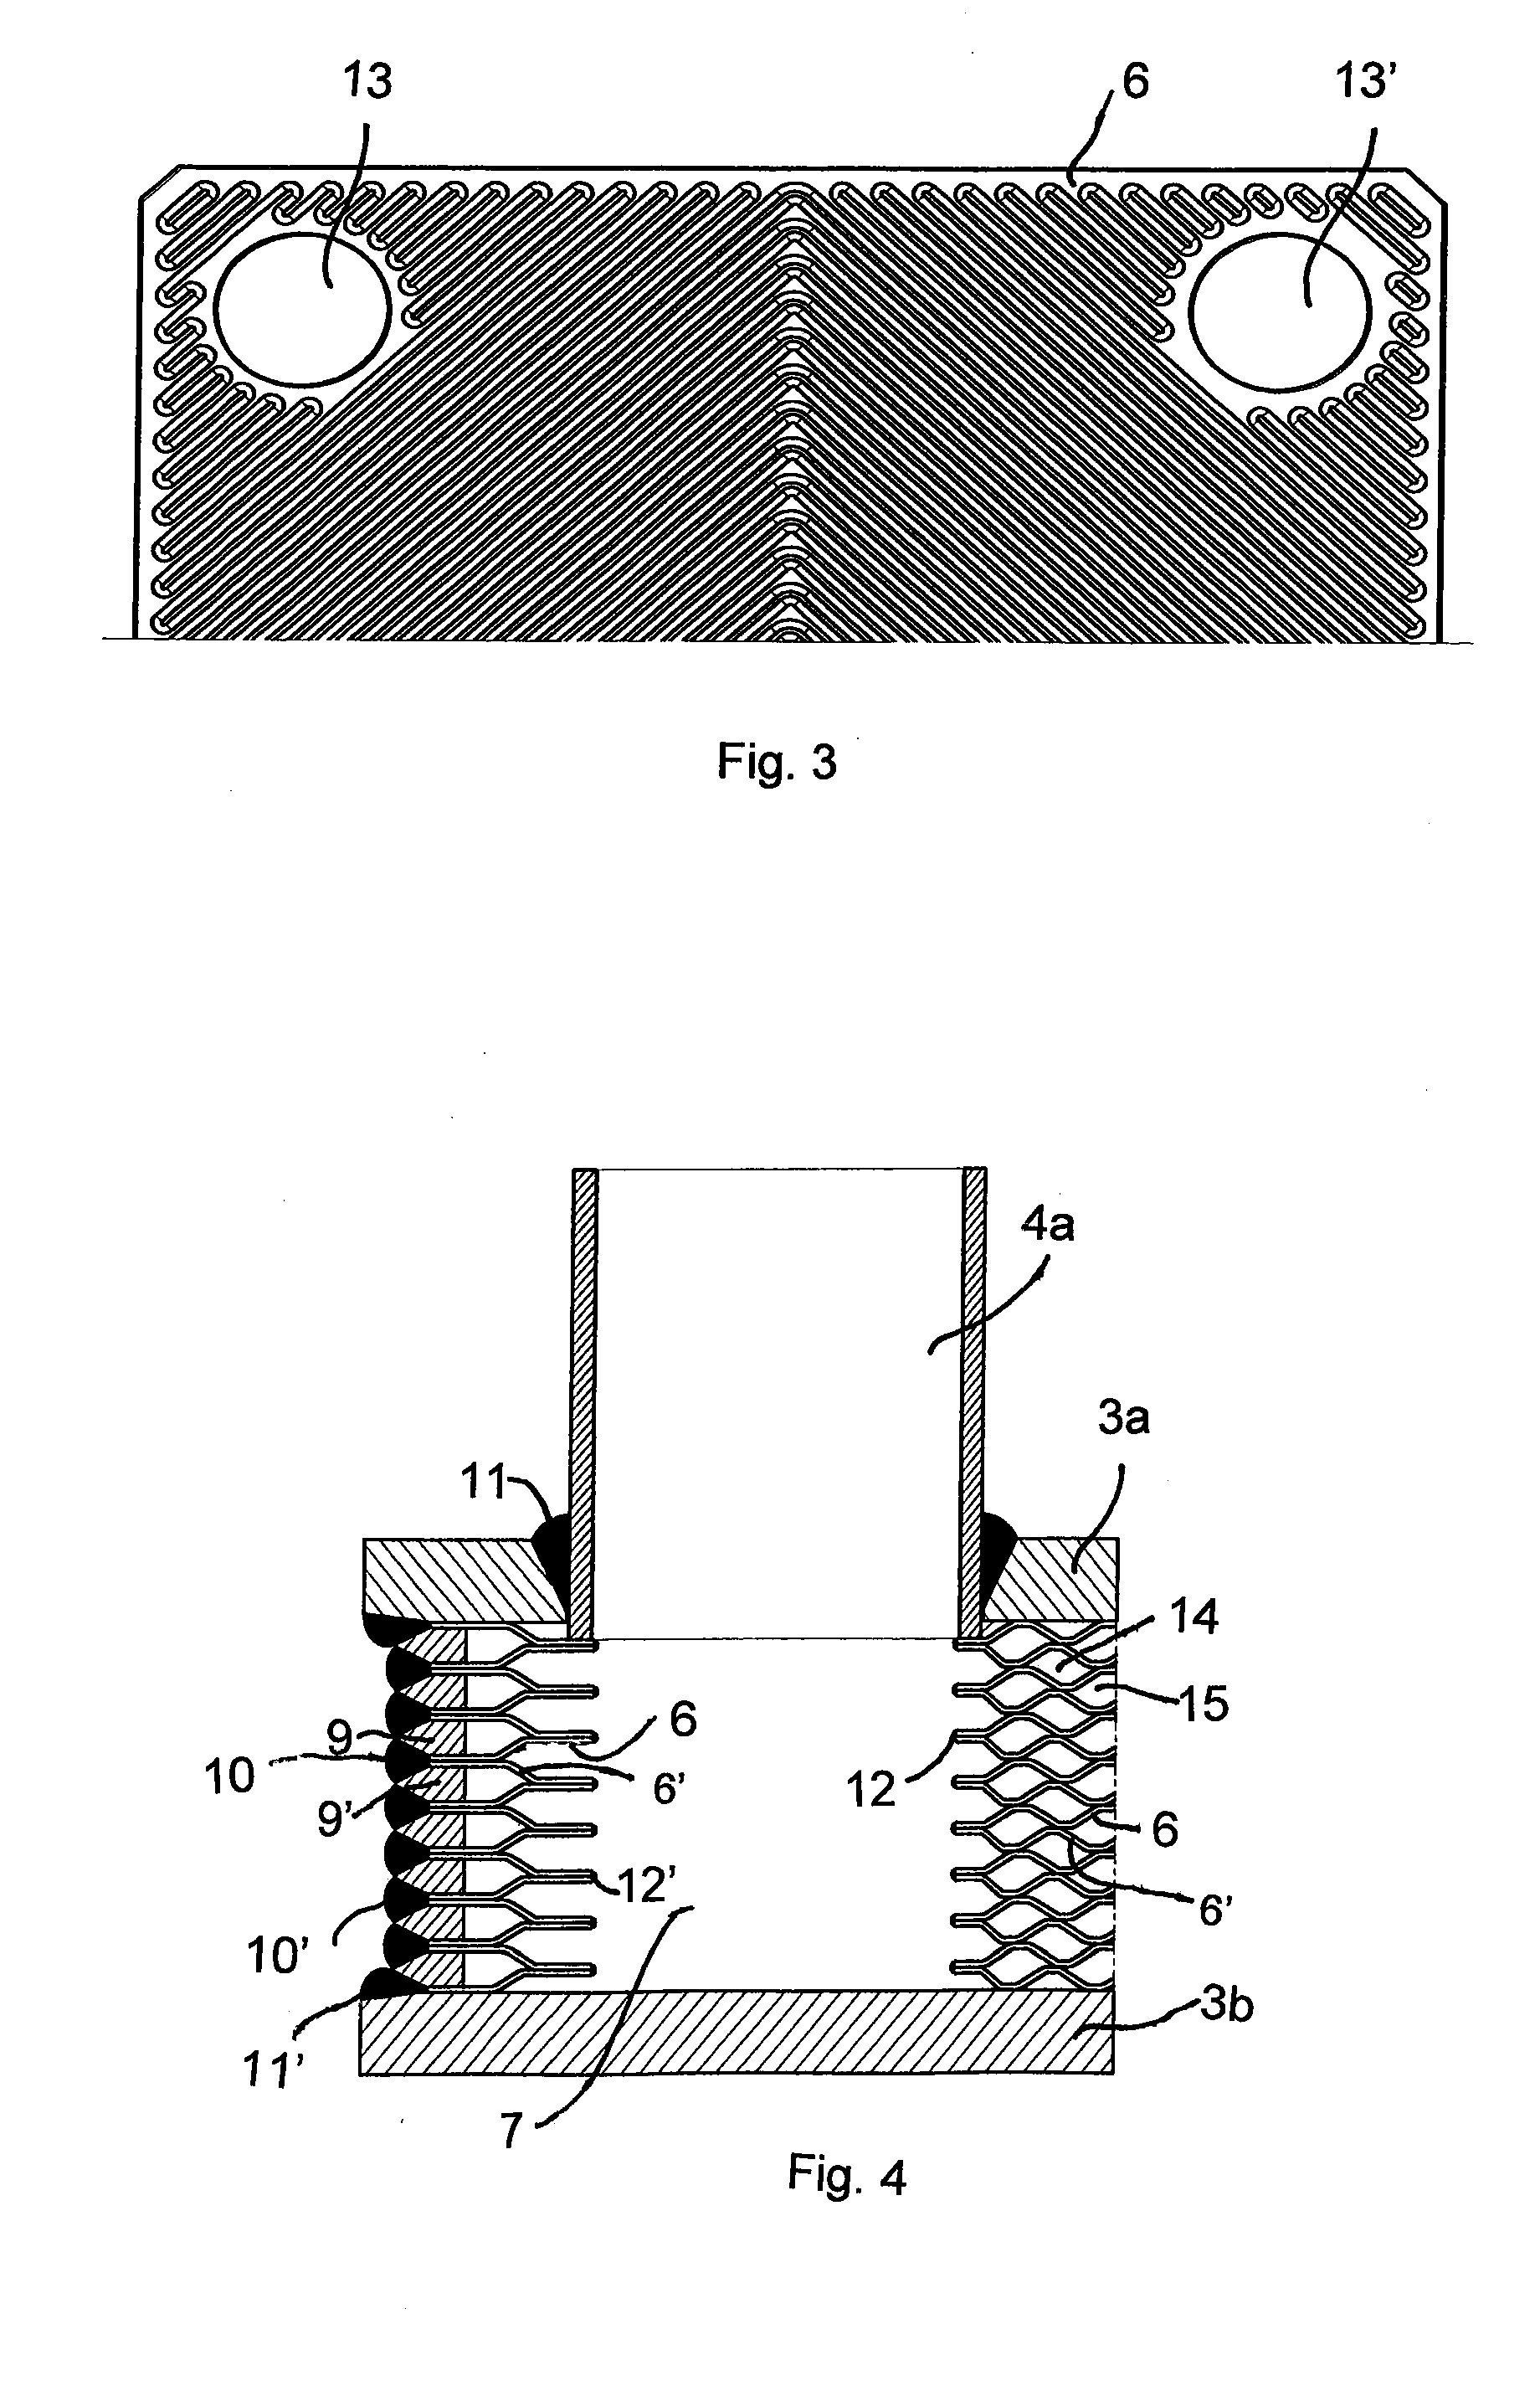 Plate heat exchanger and method for manufacturing a plate heat exchanger